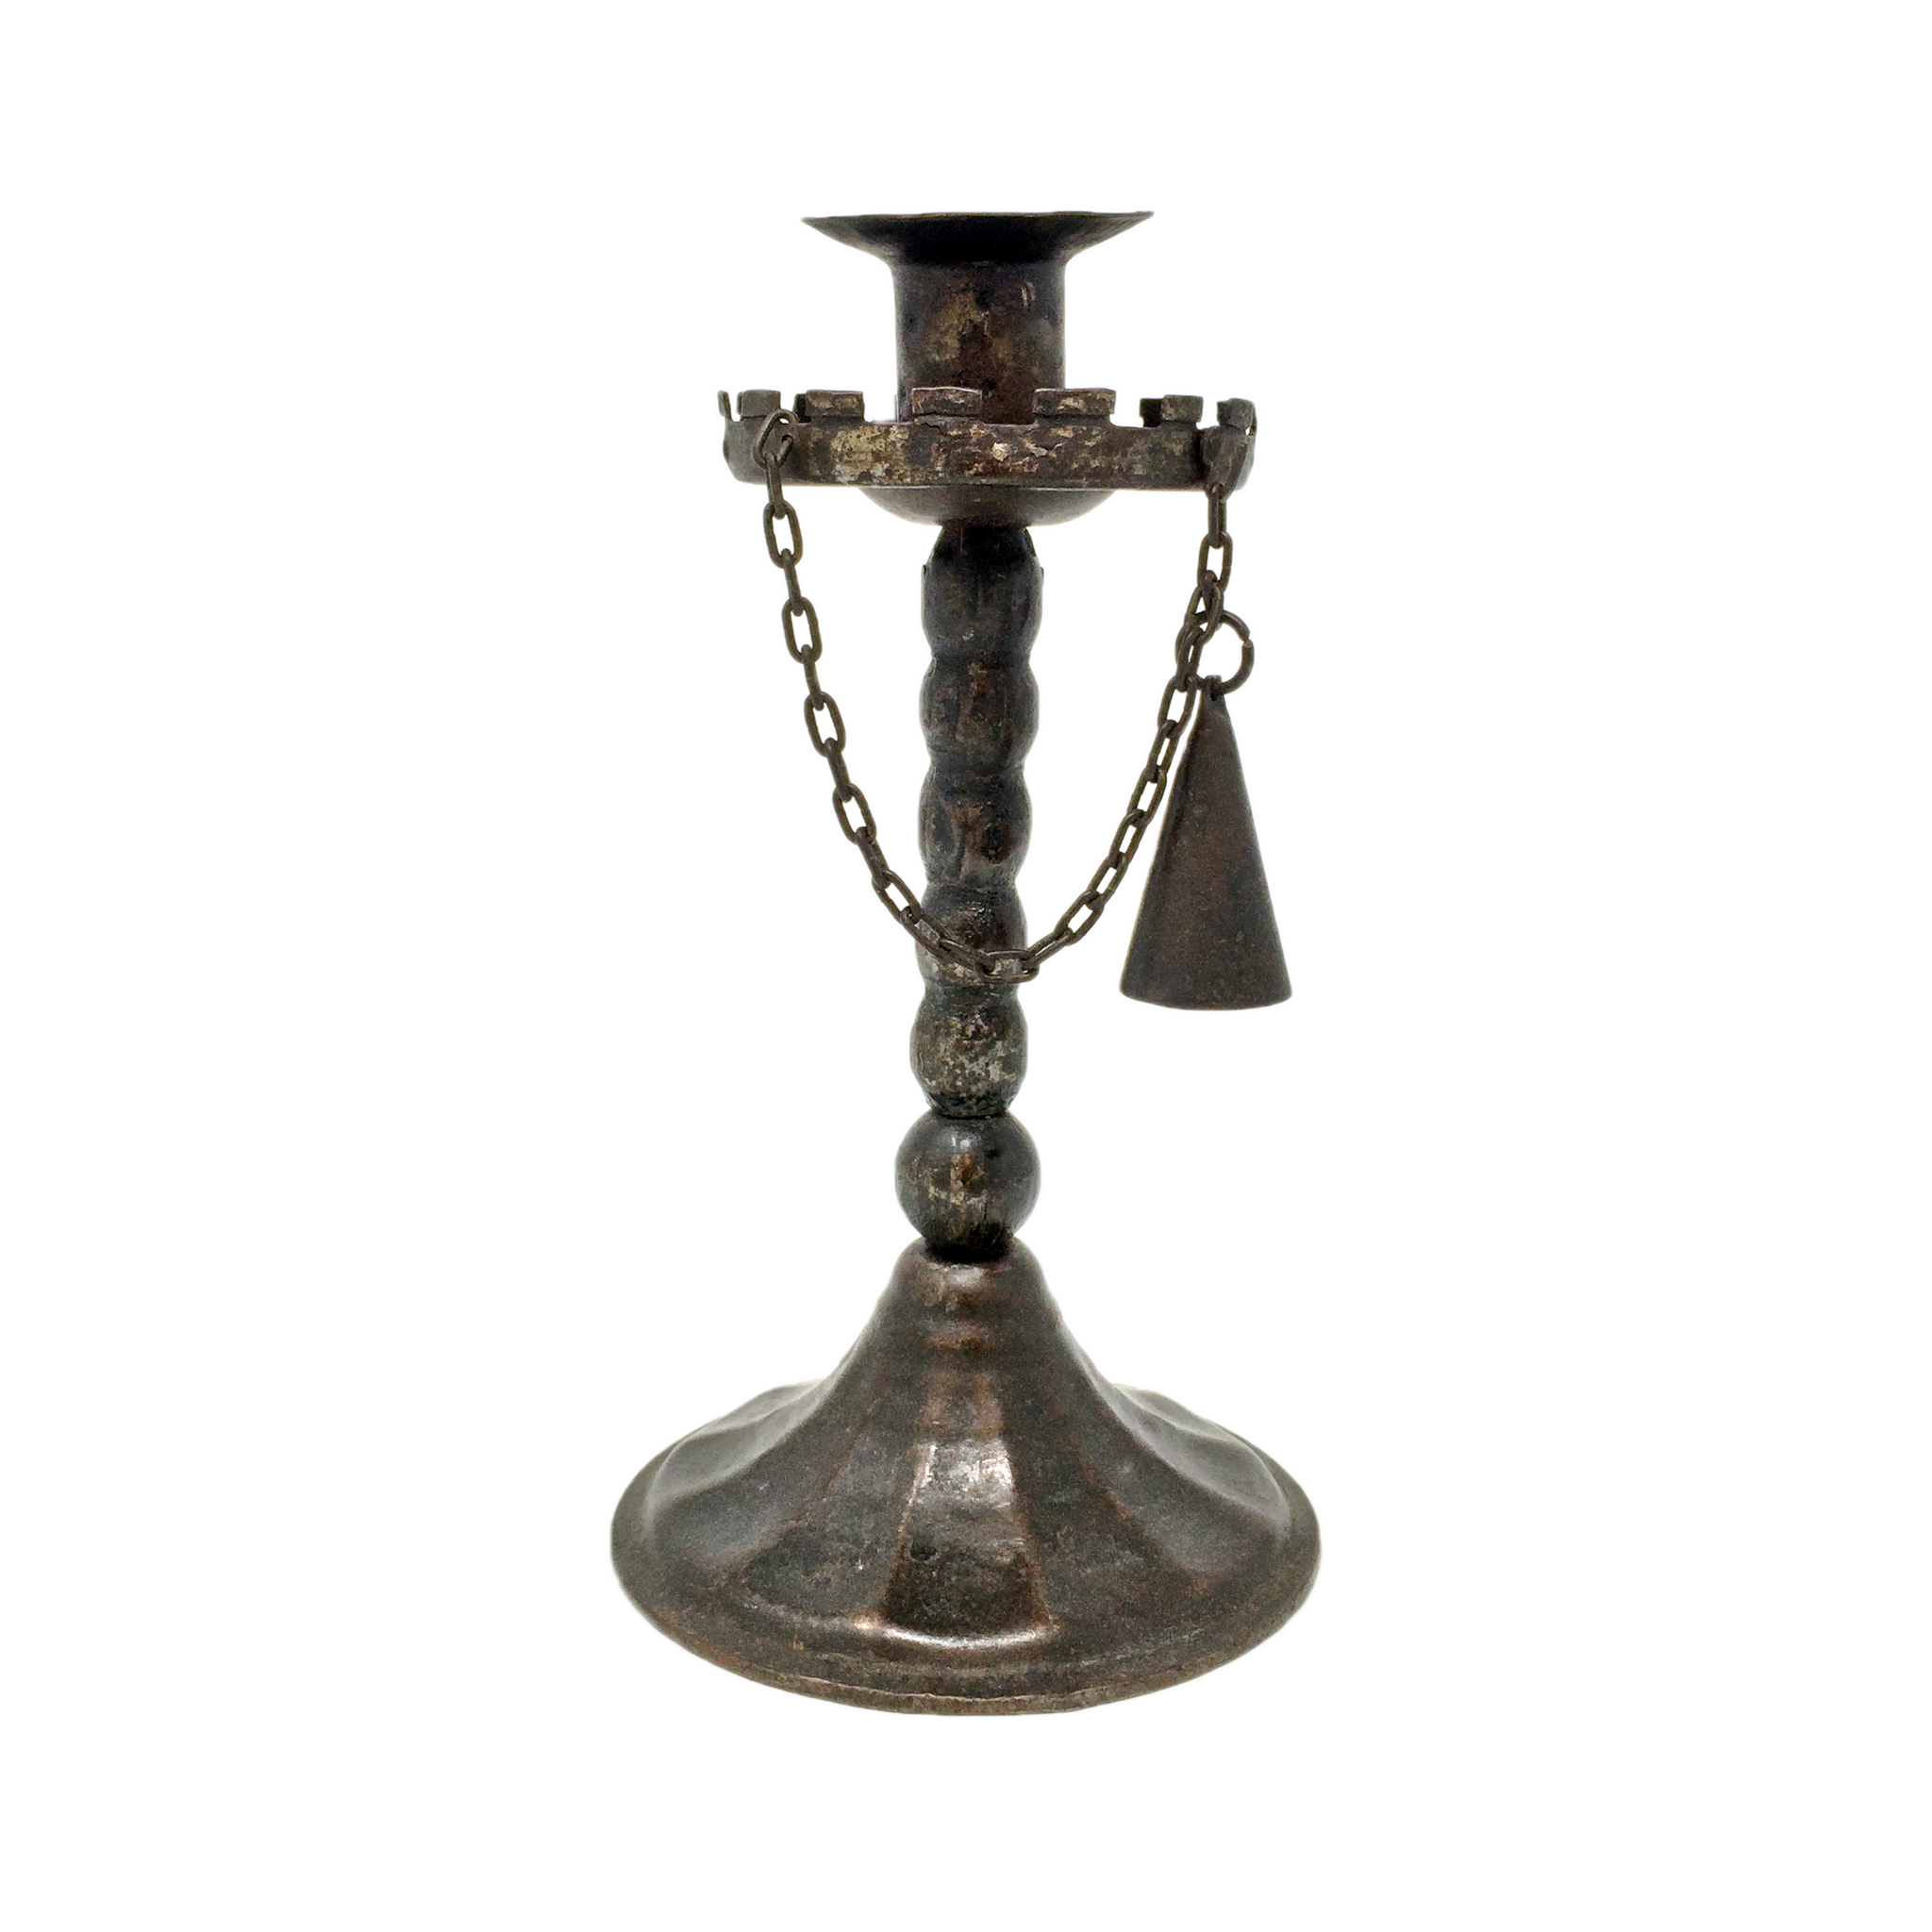 Antique wrought iron candlestick with snuff by Goberg circa 1910